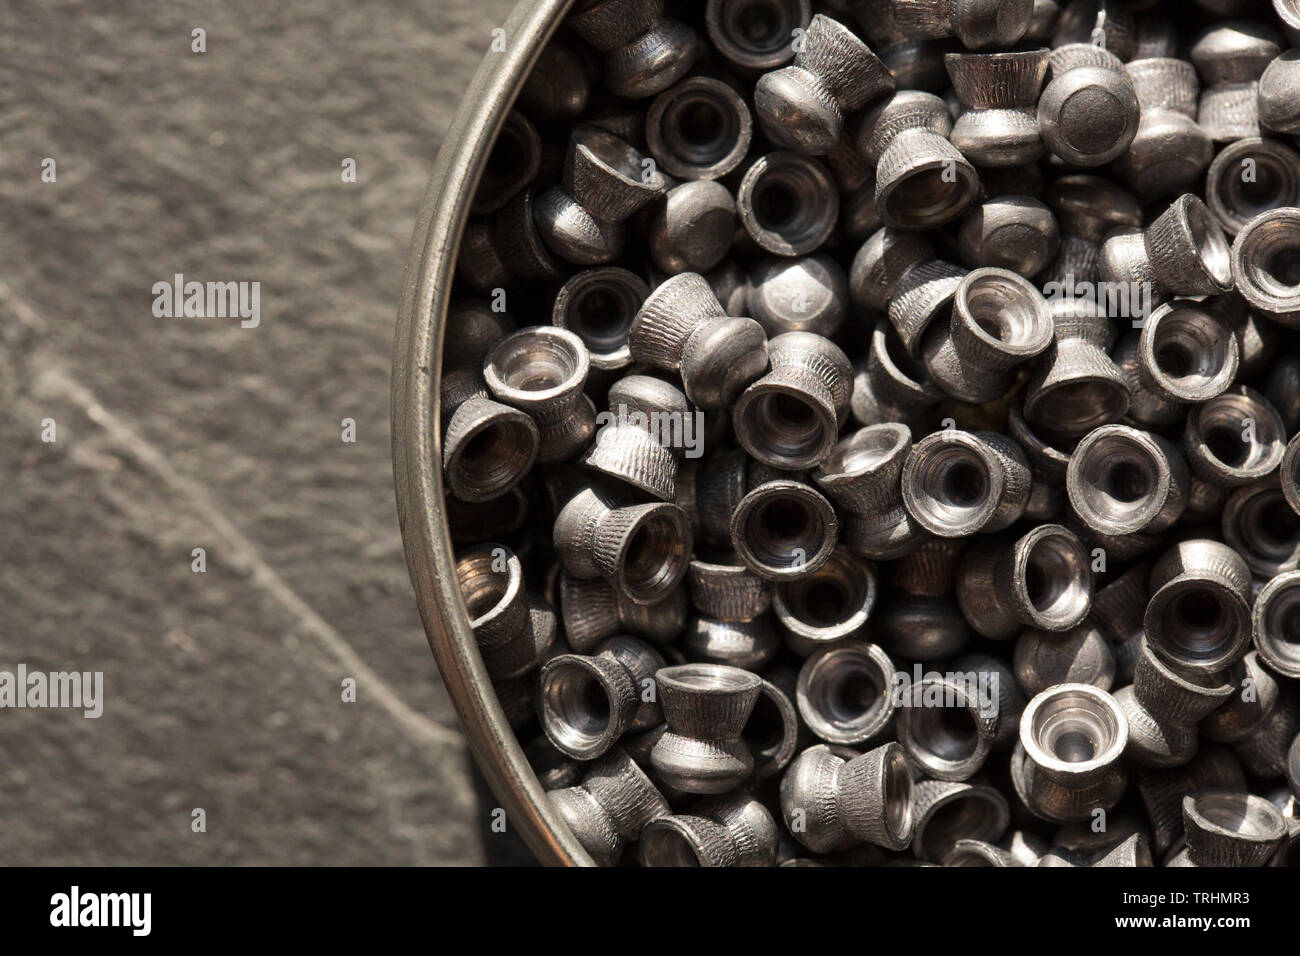 A tin of lead .22 calibre airgun pellets on a dark stone background that can be used in either air rifles or air pistols. England UK GB Stock Photo